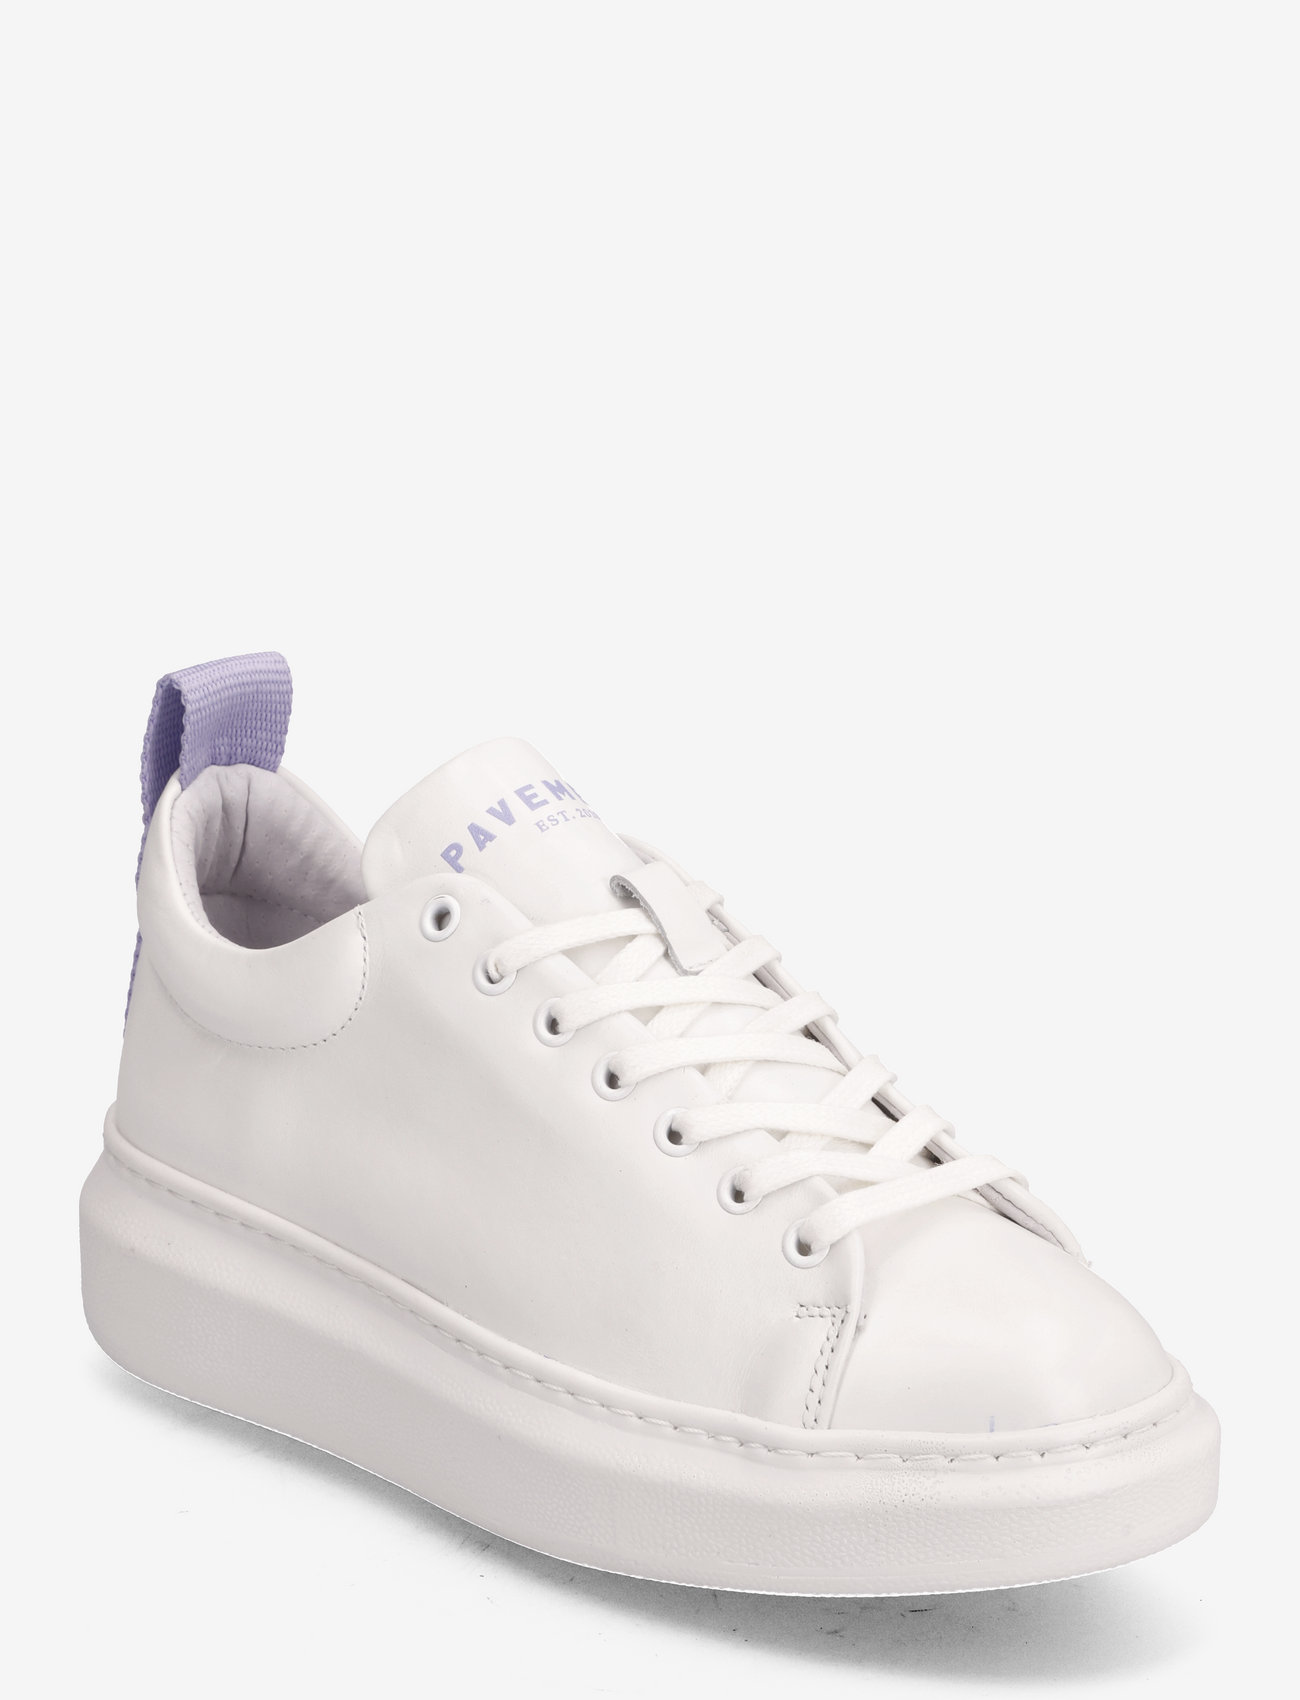 Pavement - Dee color - low top sneakers - white/purple - 0